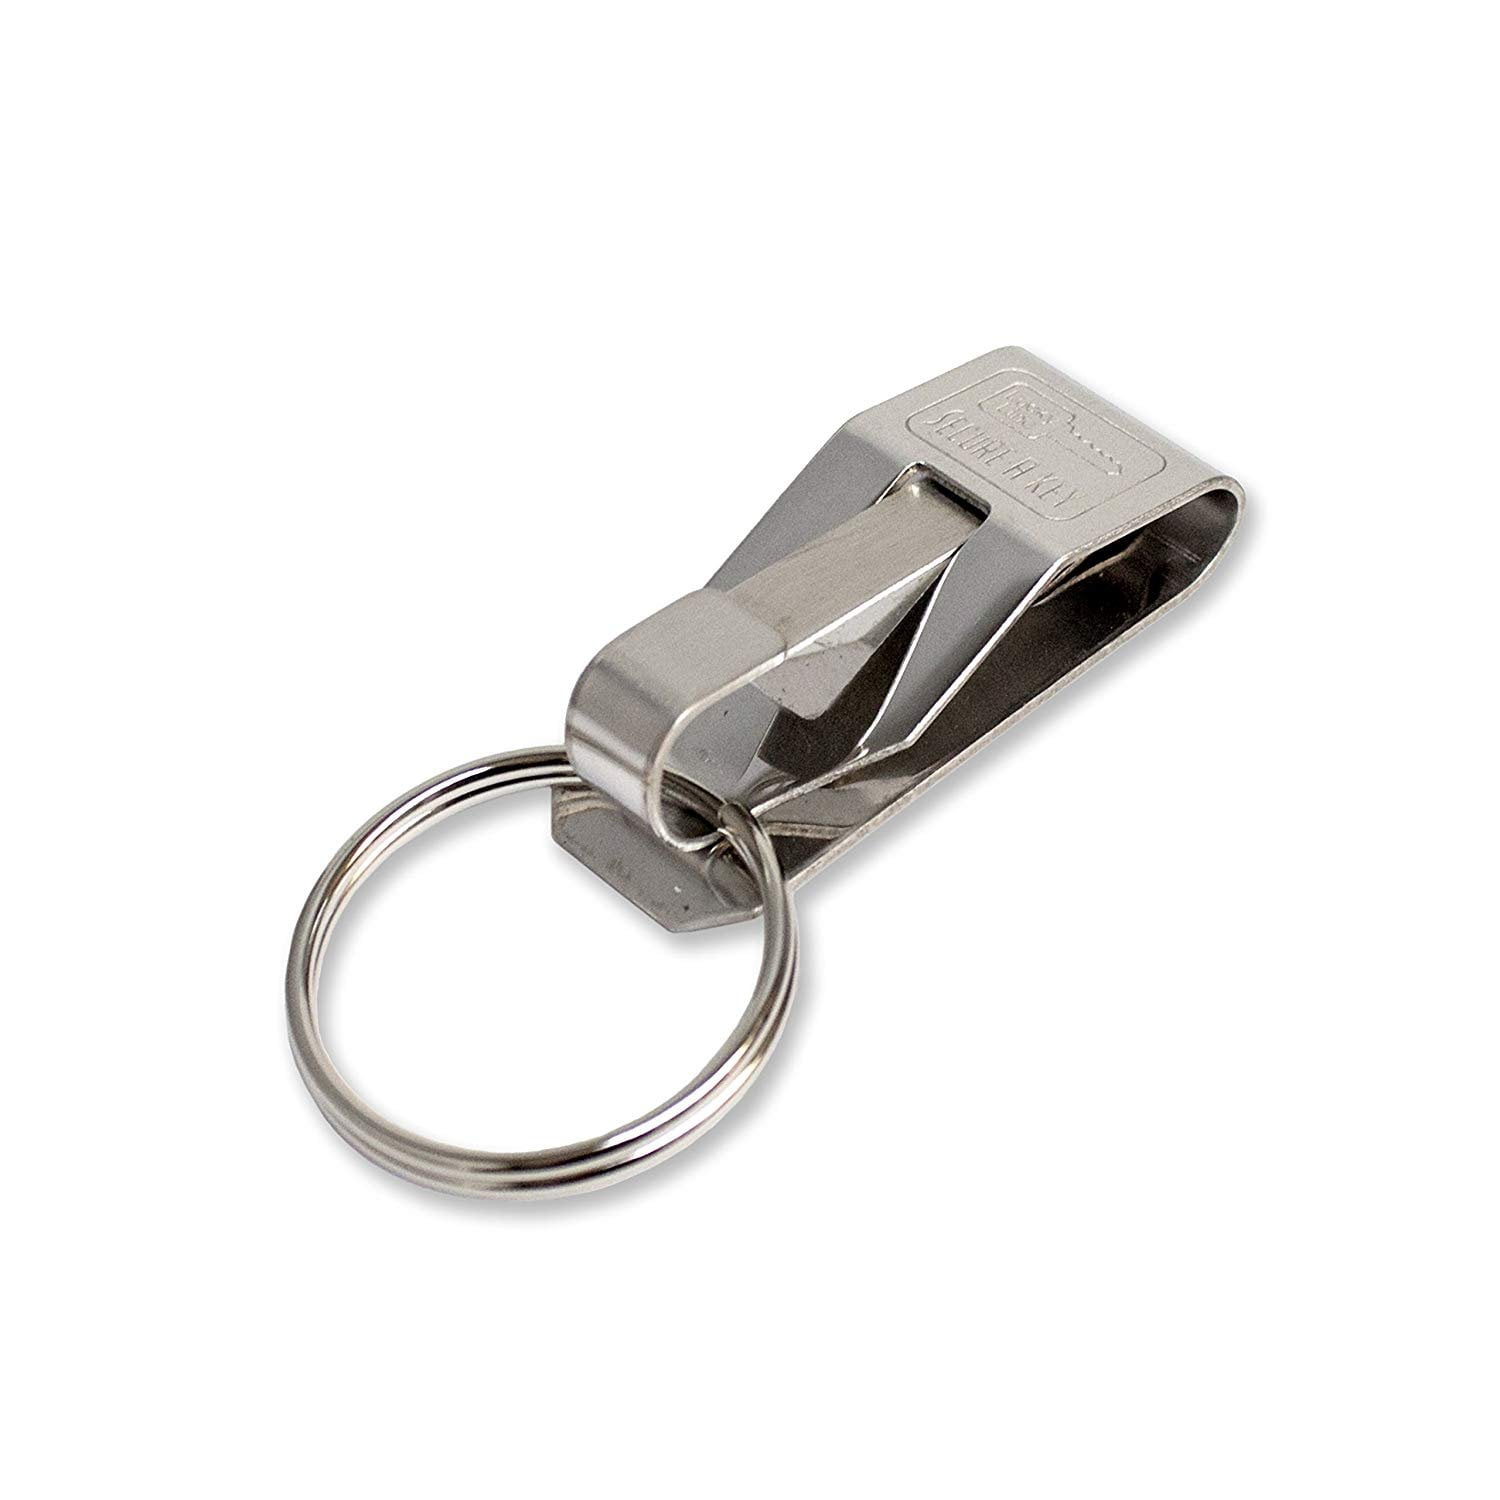 Stainless Steel Heavy Duty Dual Key Rings with Bottle Opener Key Chain Clip for 